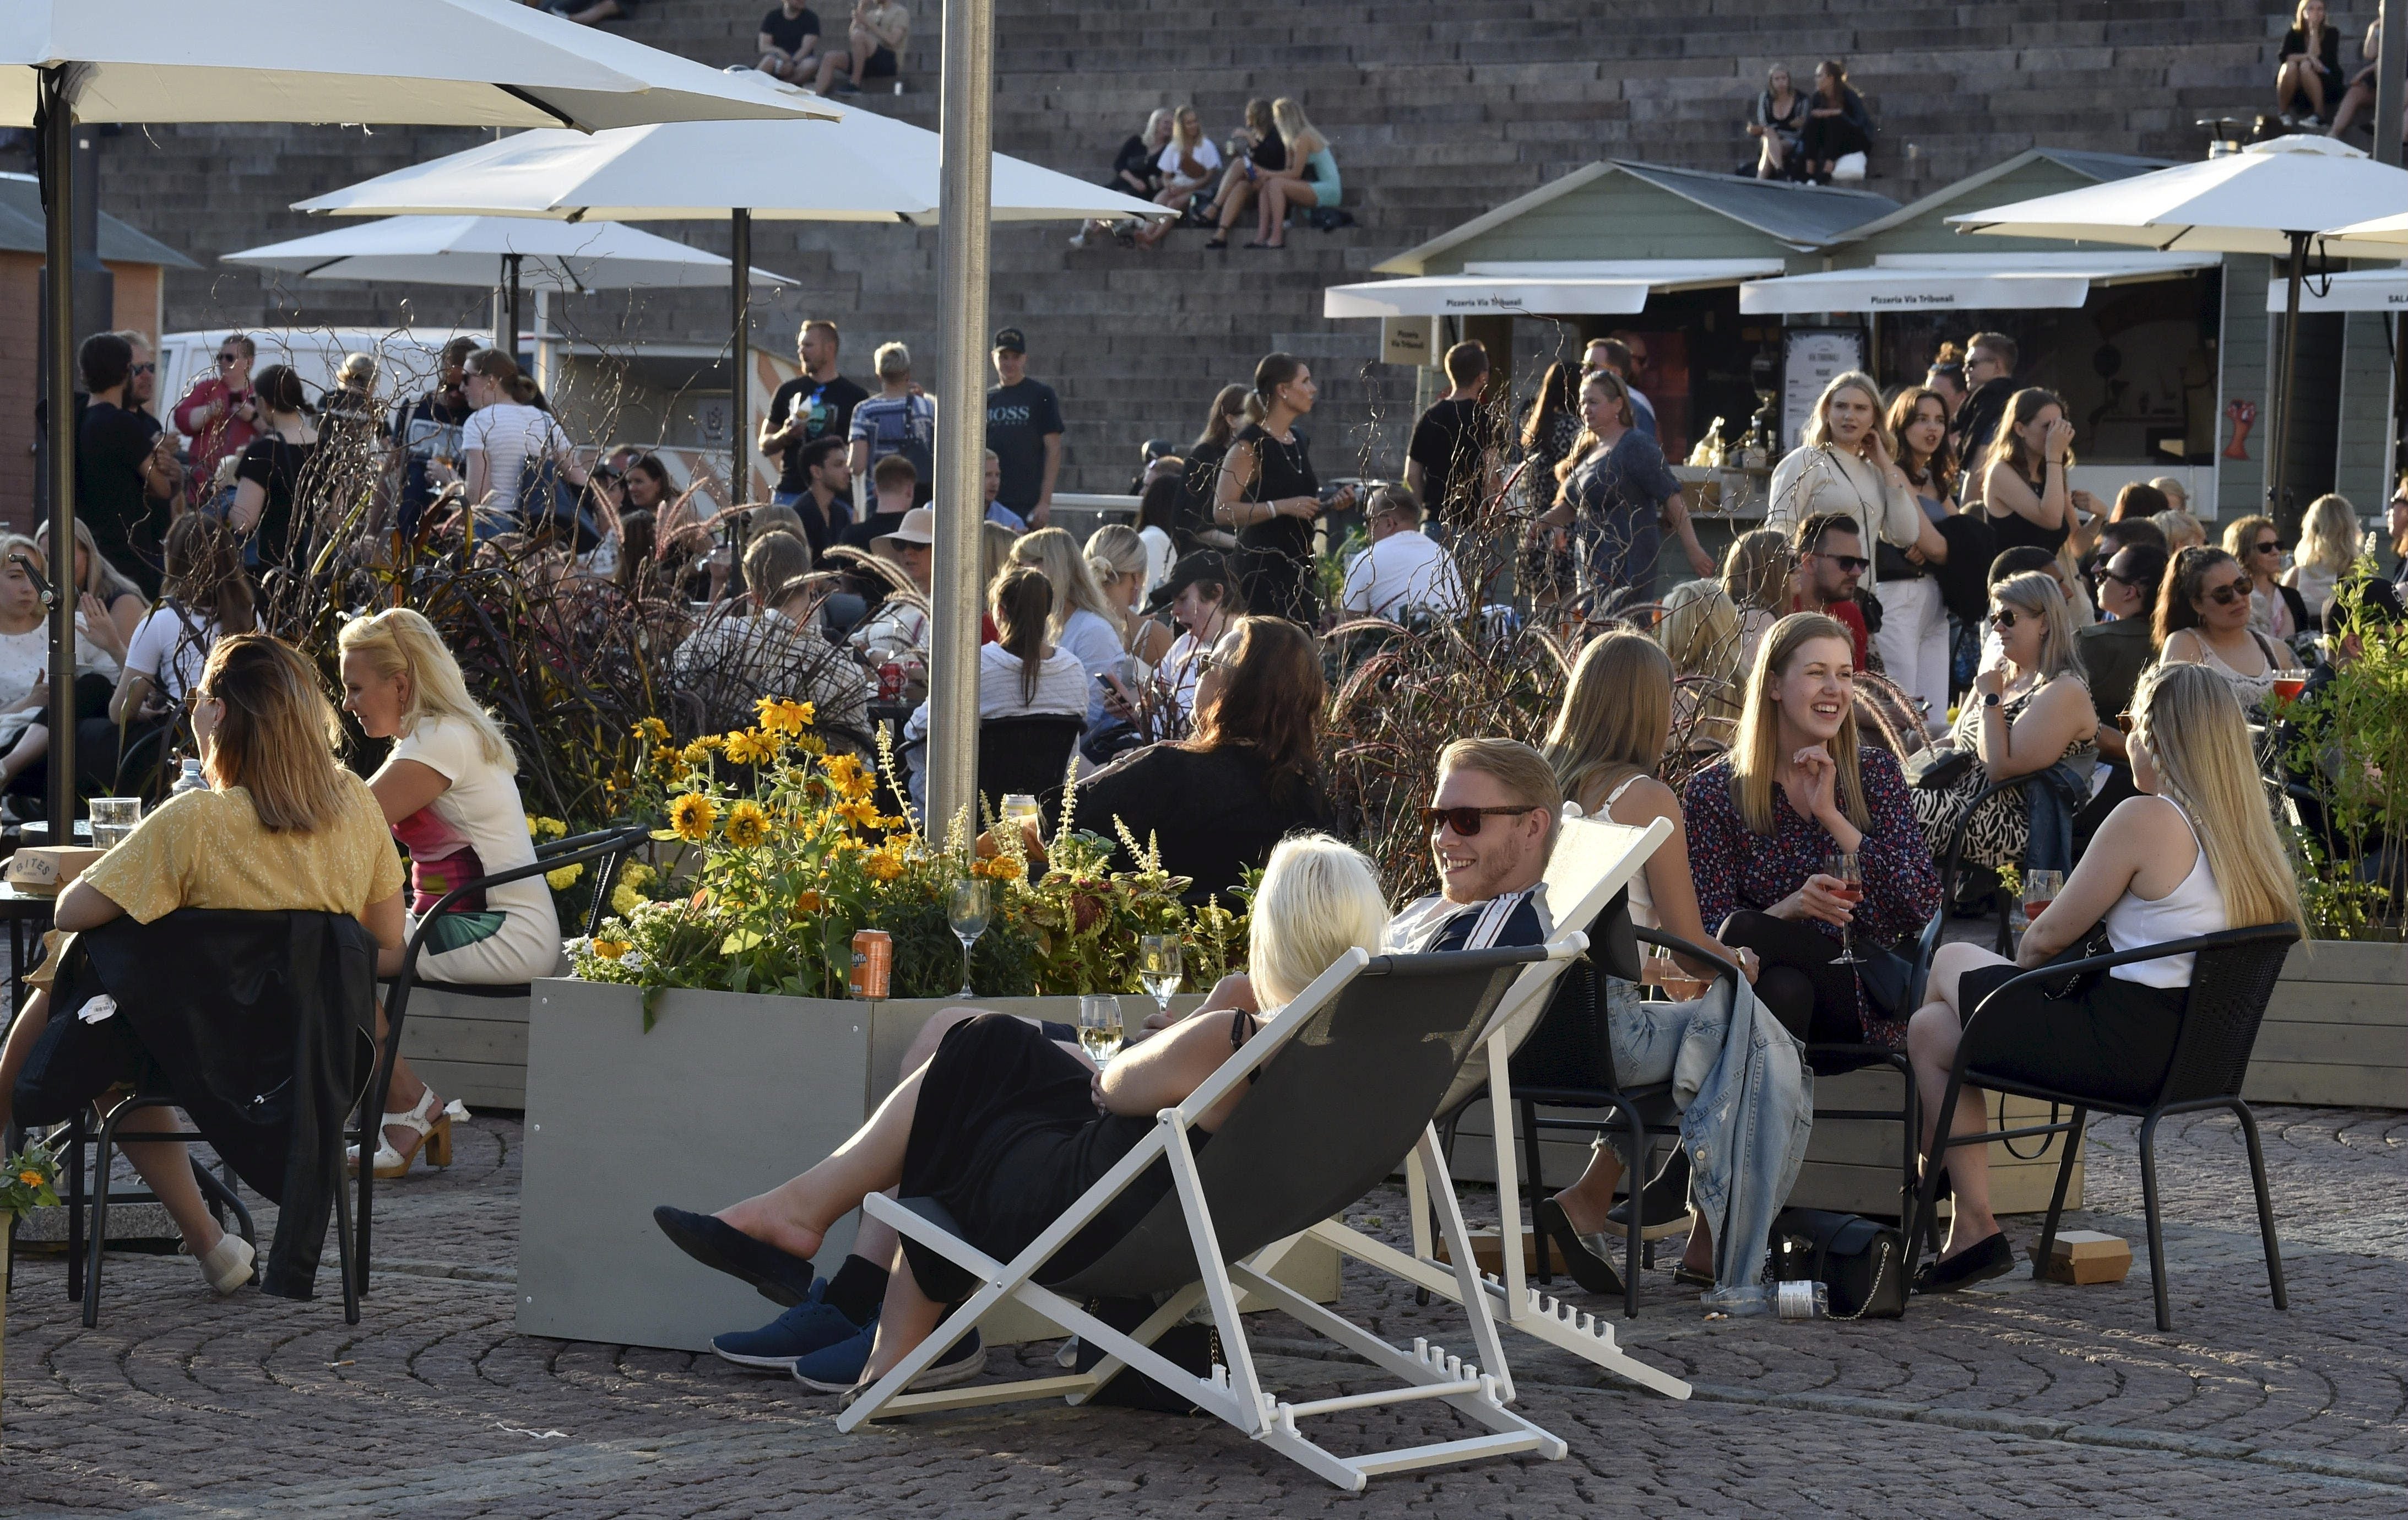 People enjoy meals and drinks on a large open-air food court in the centrally-located Senate Square in Helsinki, Finland, late on 17 July, 2020, the first Friday after a lifting of Covid-19 restrictions.